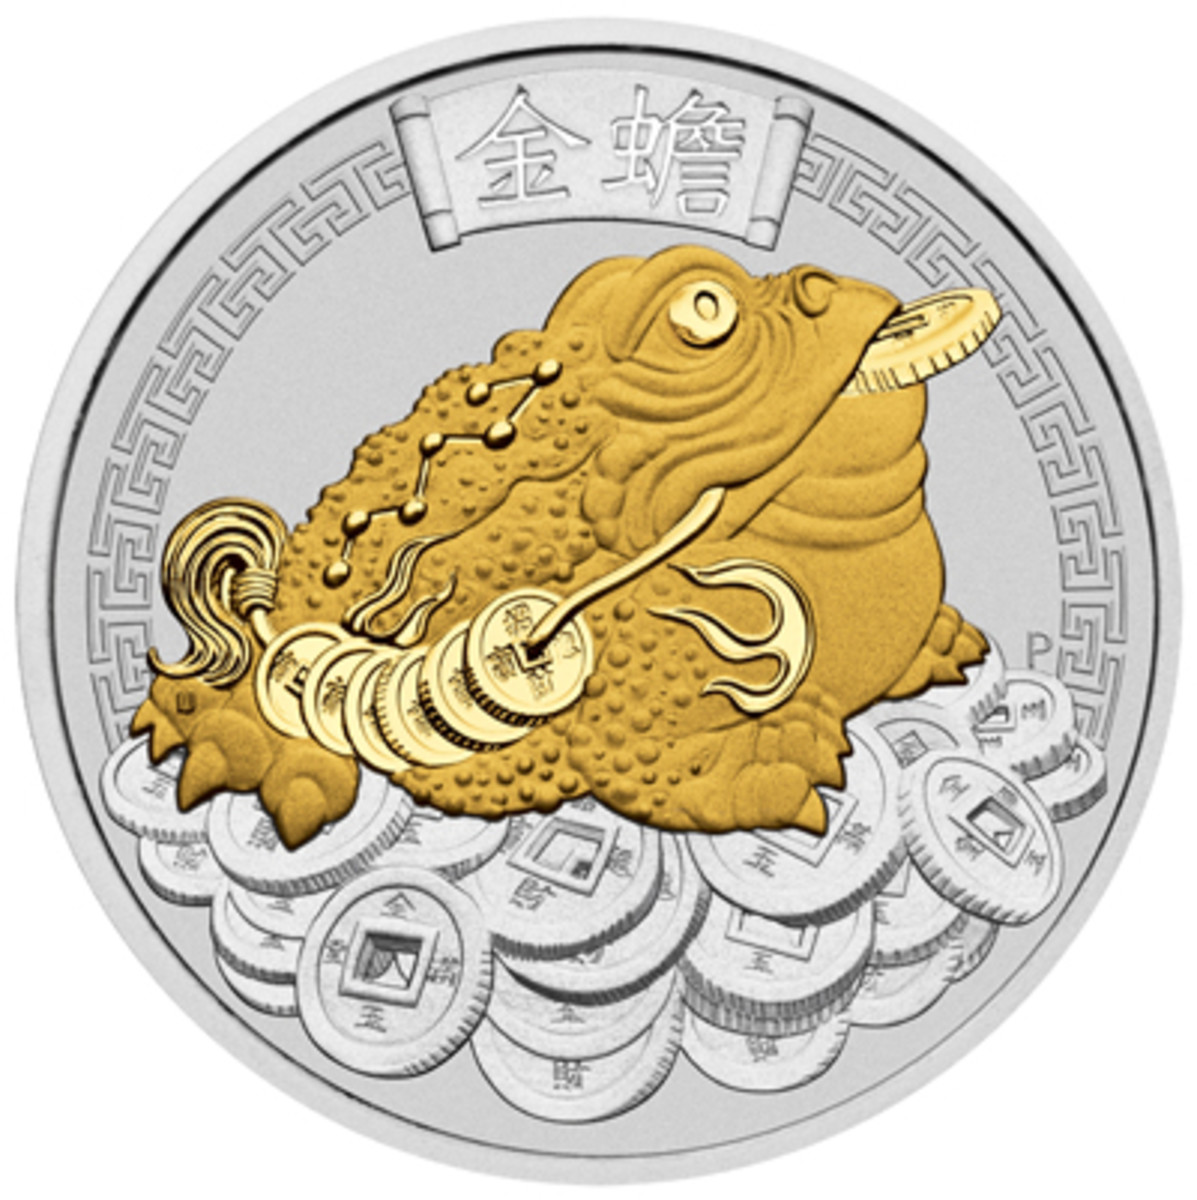  Reverse of Tuvalu’s new silver dollar featuring Jin Chan, or The Three-legged Money Toad. (Image courtesy and © The Perth Mint)